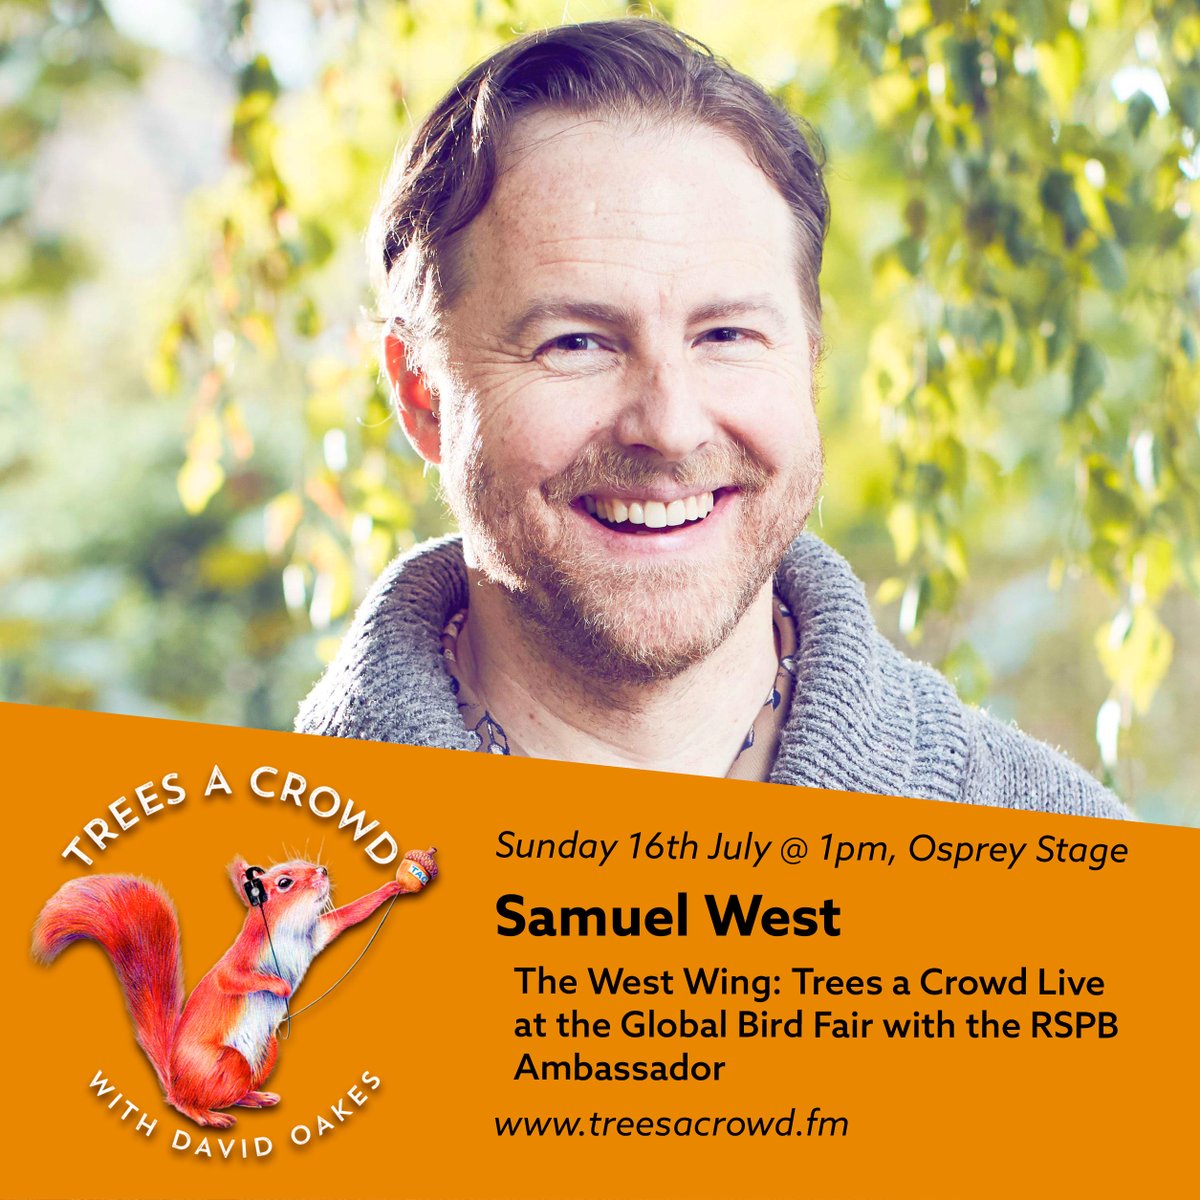 🐦🦅🐤 The TREES A CROWD Podcast is headed to the @GlobalBirdfair! 🪶🪺🦉

THE WEST WING
Actor, Director & @Natures_Voice ambassador, @exitthelemming, will be appearing alongside host @David_Oakes on Sunday 16th of July @ 1pm.

Expect Birds, Poetry and all things Great and Small!